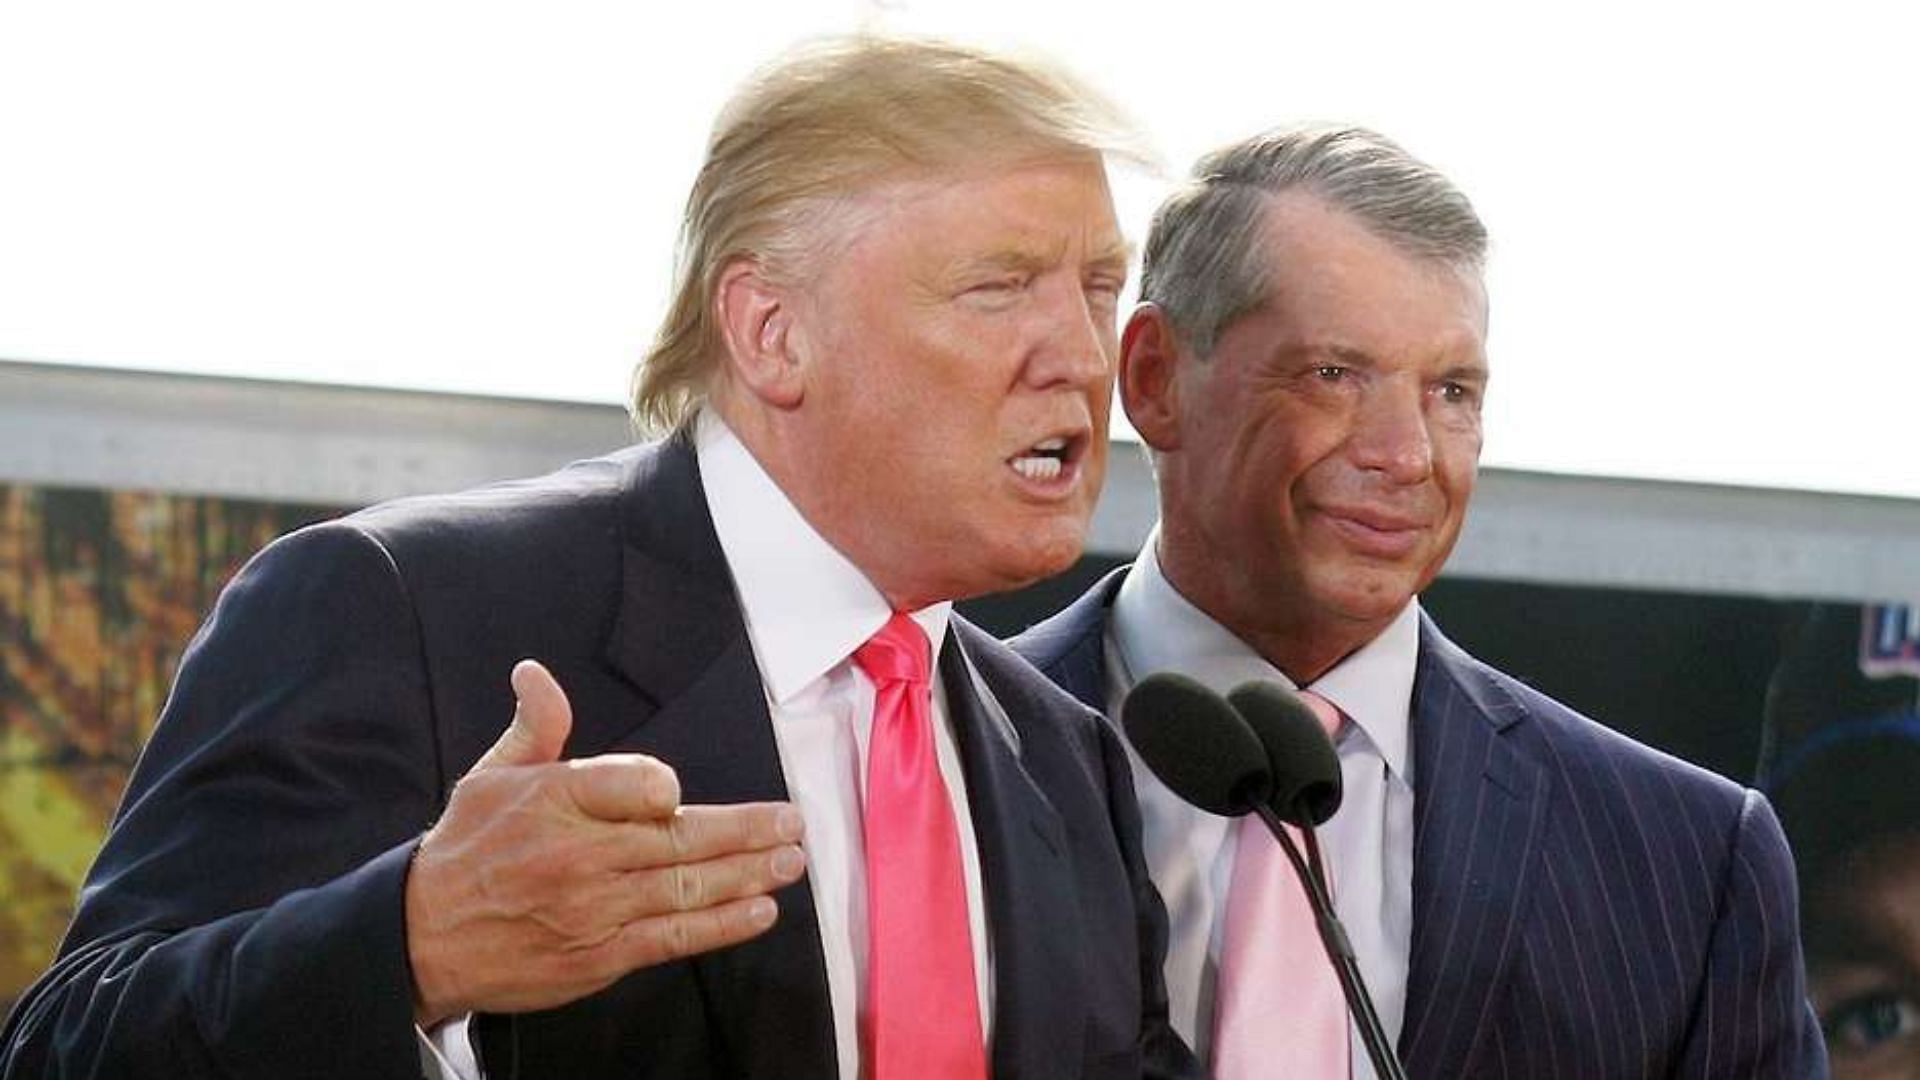 Vince McMahon and Donald Trump at a press conference!